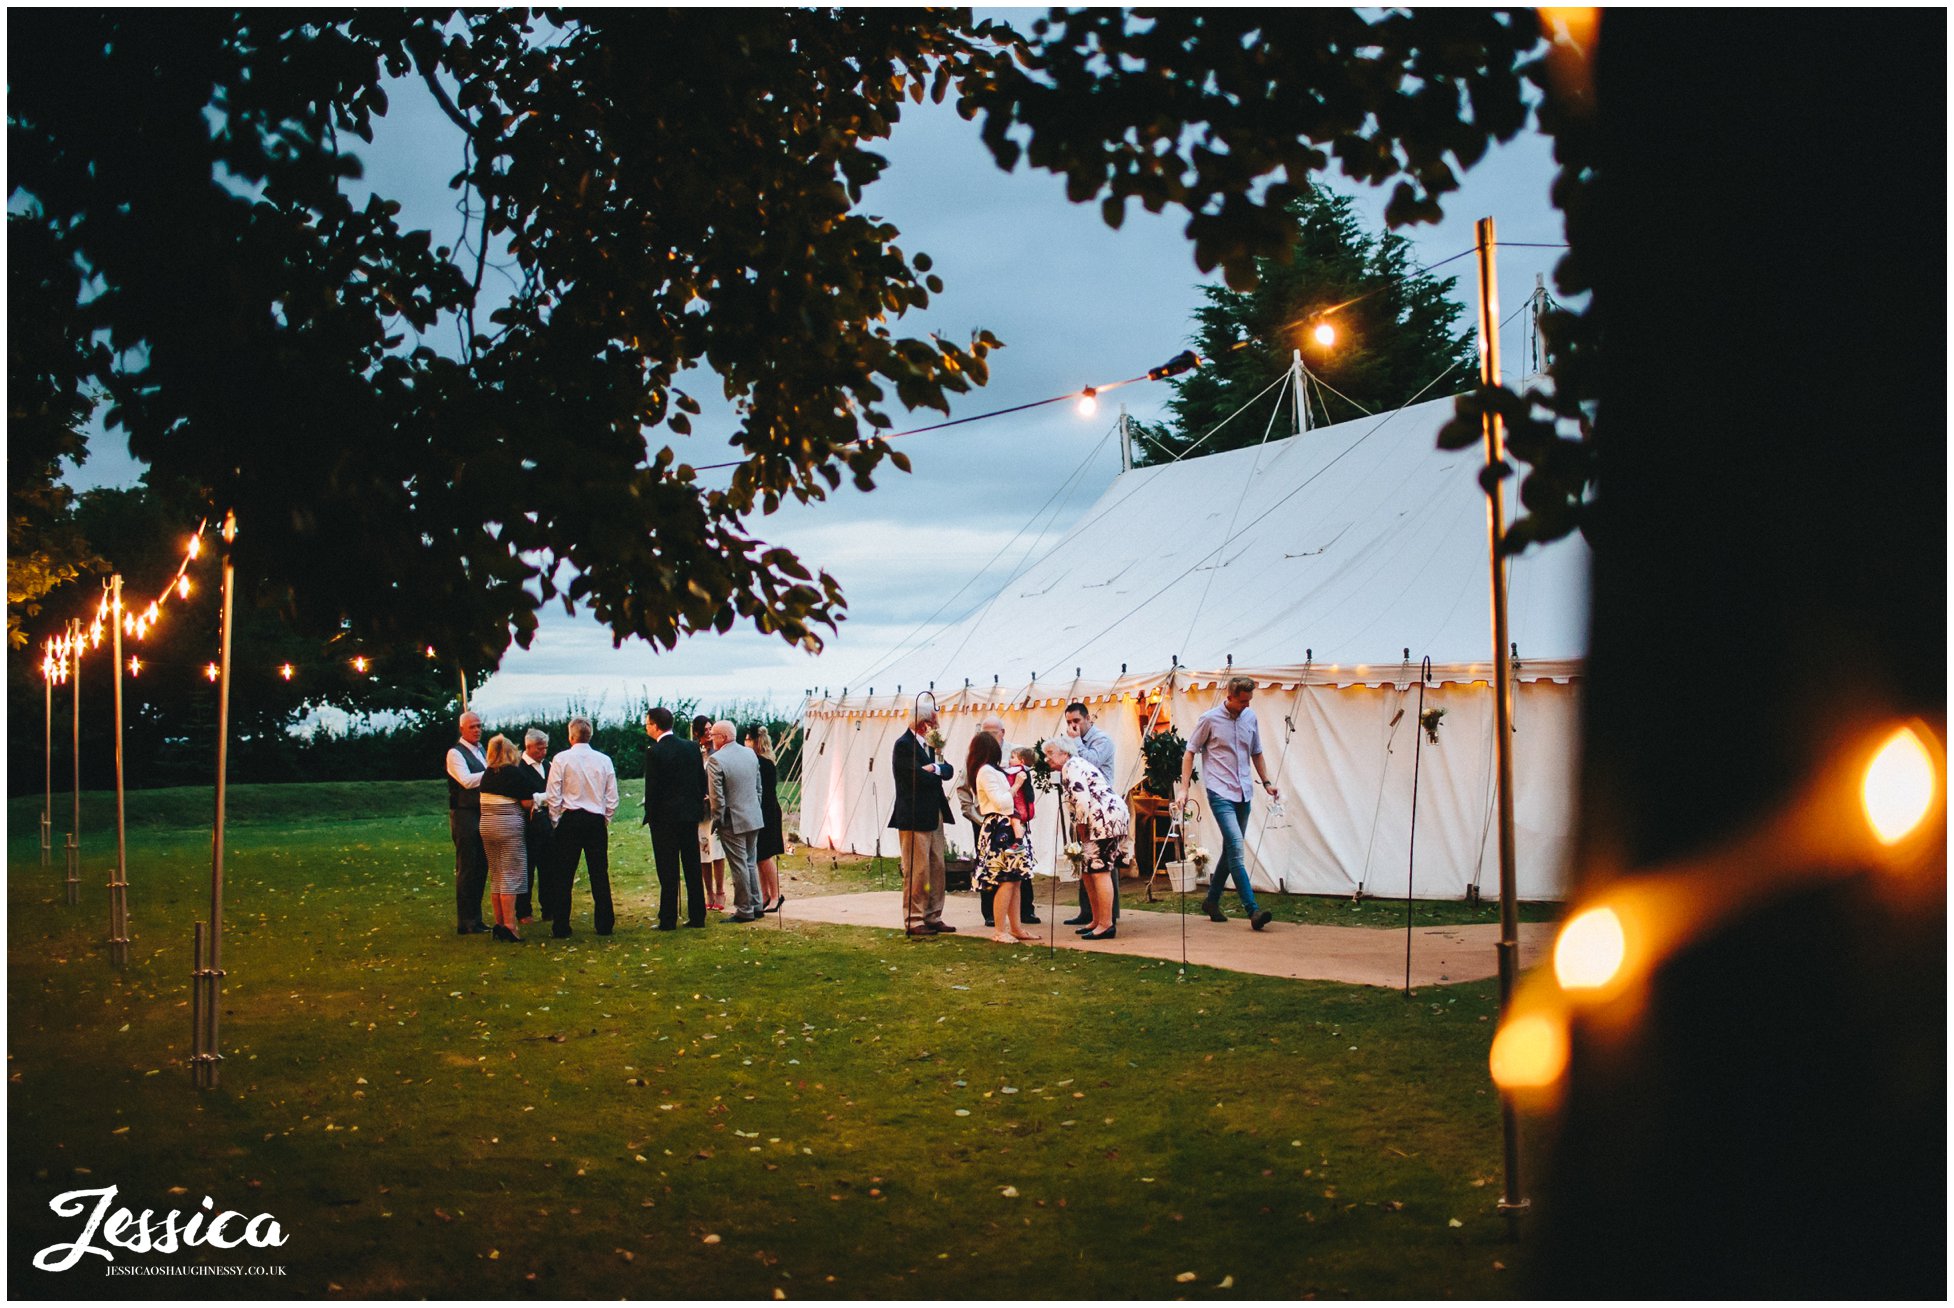 cholmondeley arms wedding marquee lit by fairy lights at night